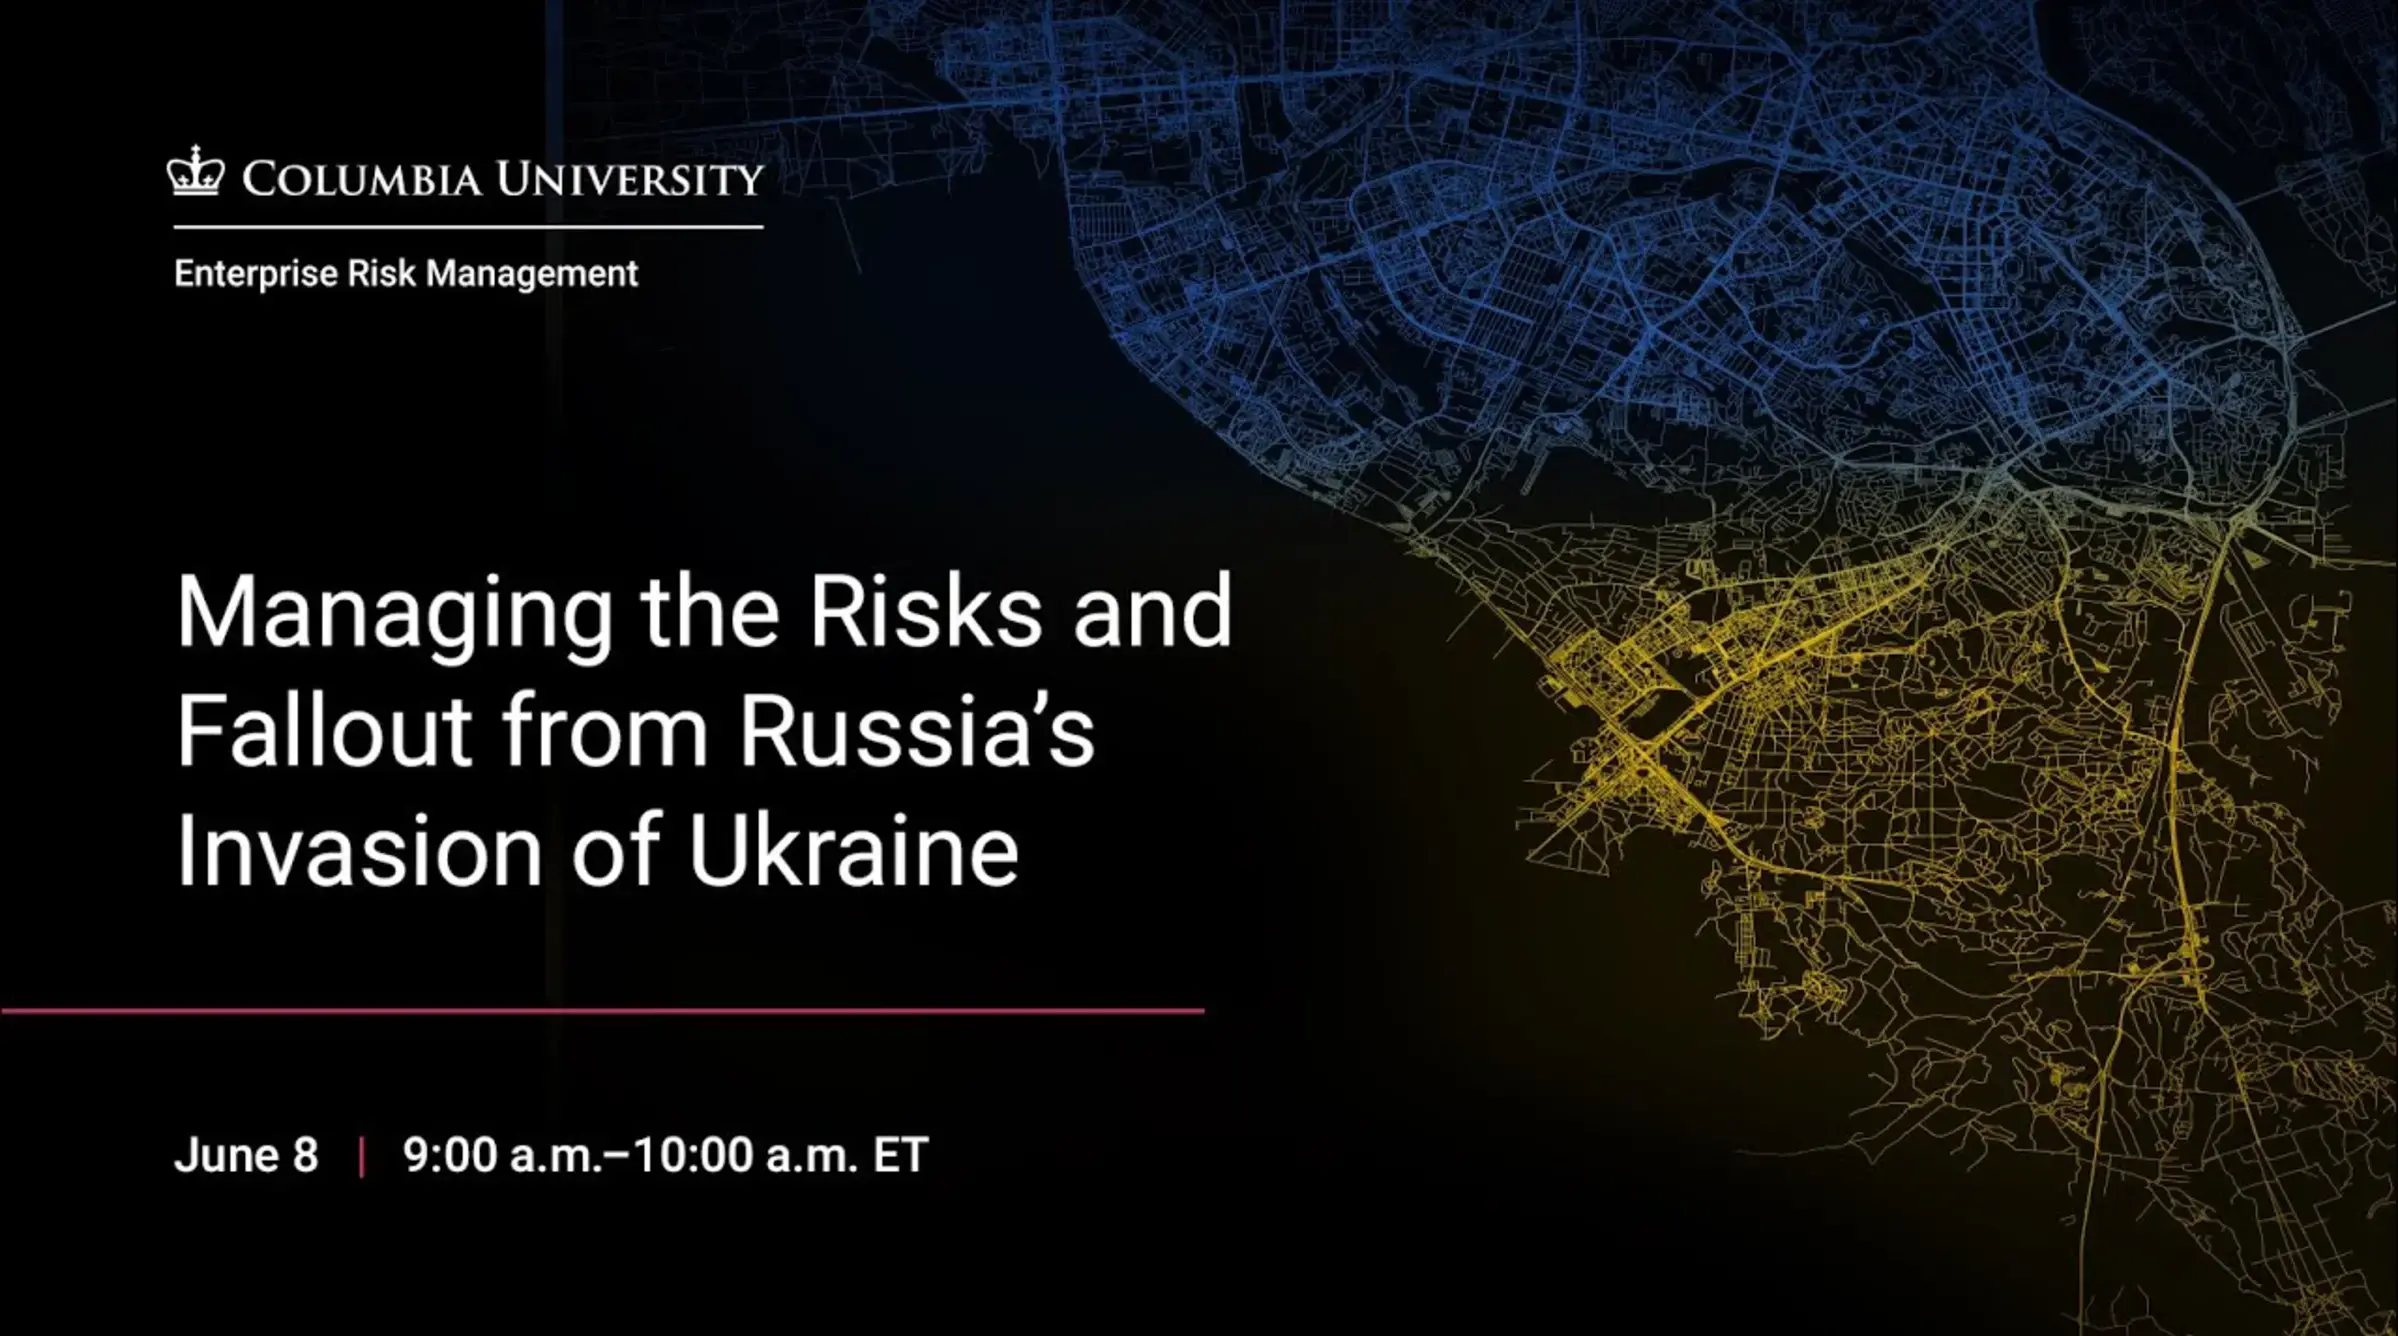 Managing the Risks and Fallout from Russia's Invasion of Ukraine